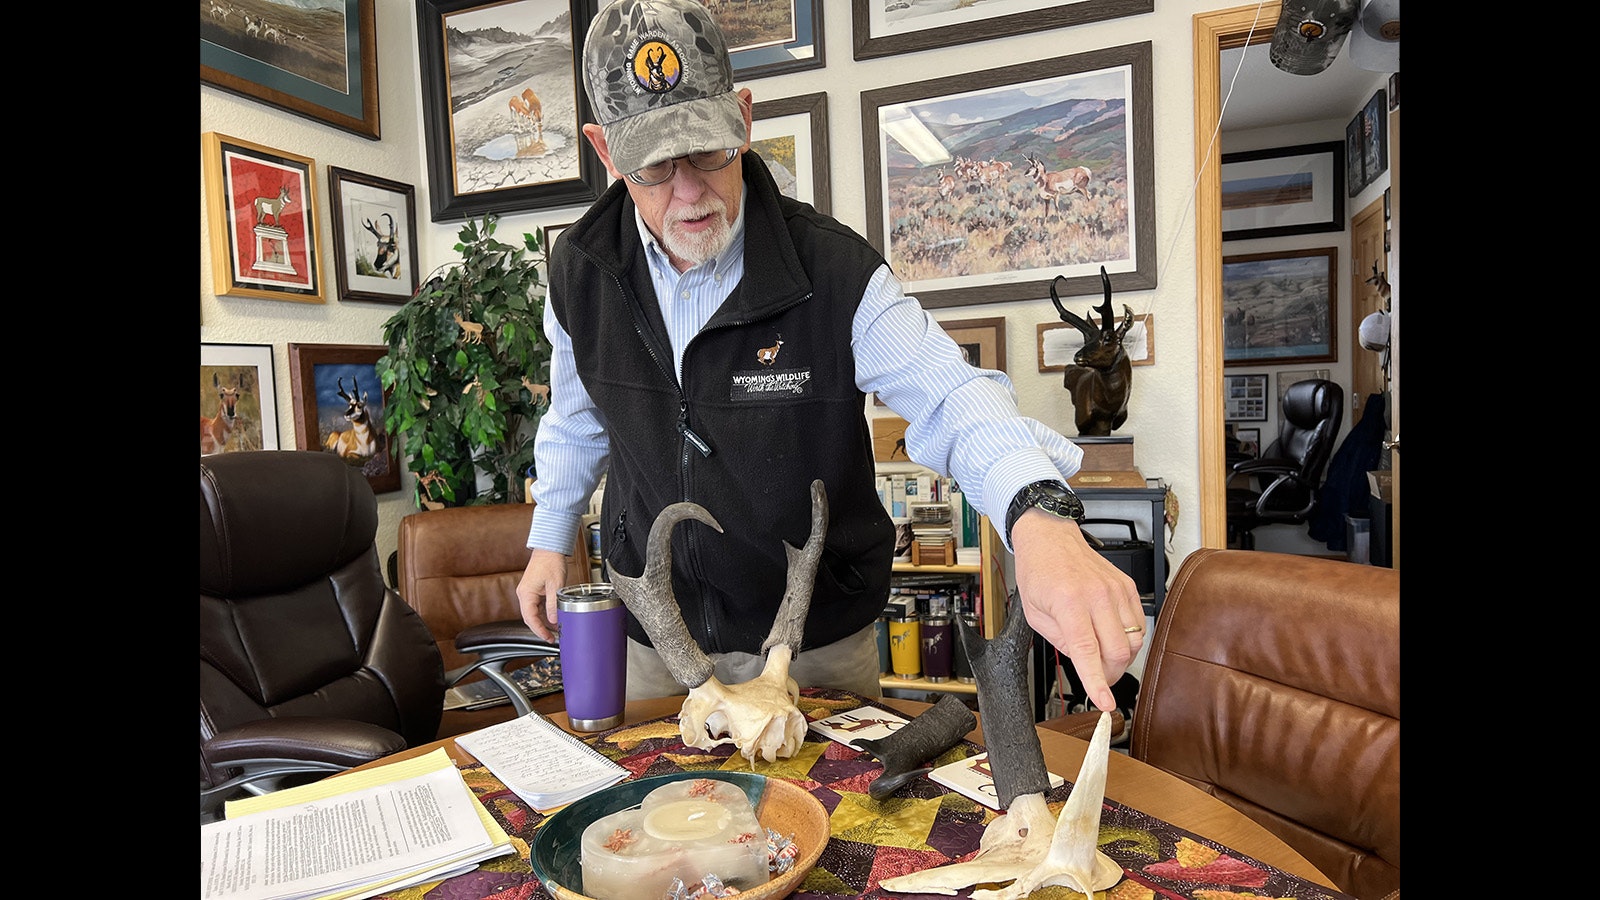 Wildlife Biologist Rich Guenzel explains that antelope have permanent horns, and shed the outer sheath each year.